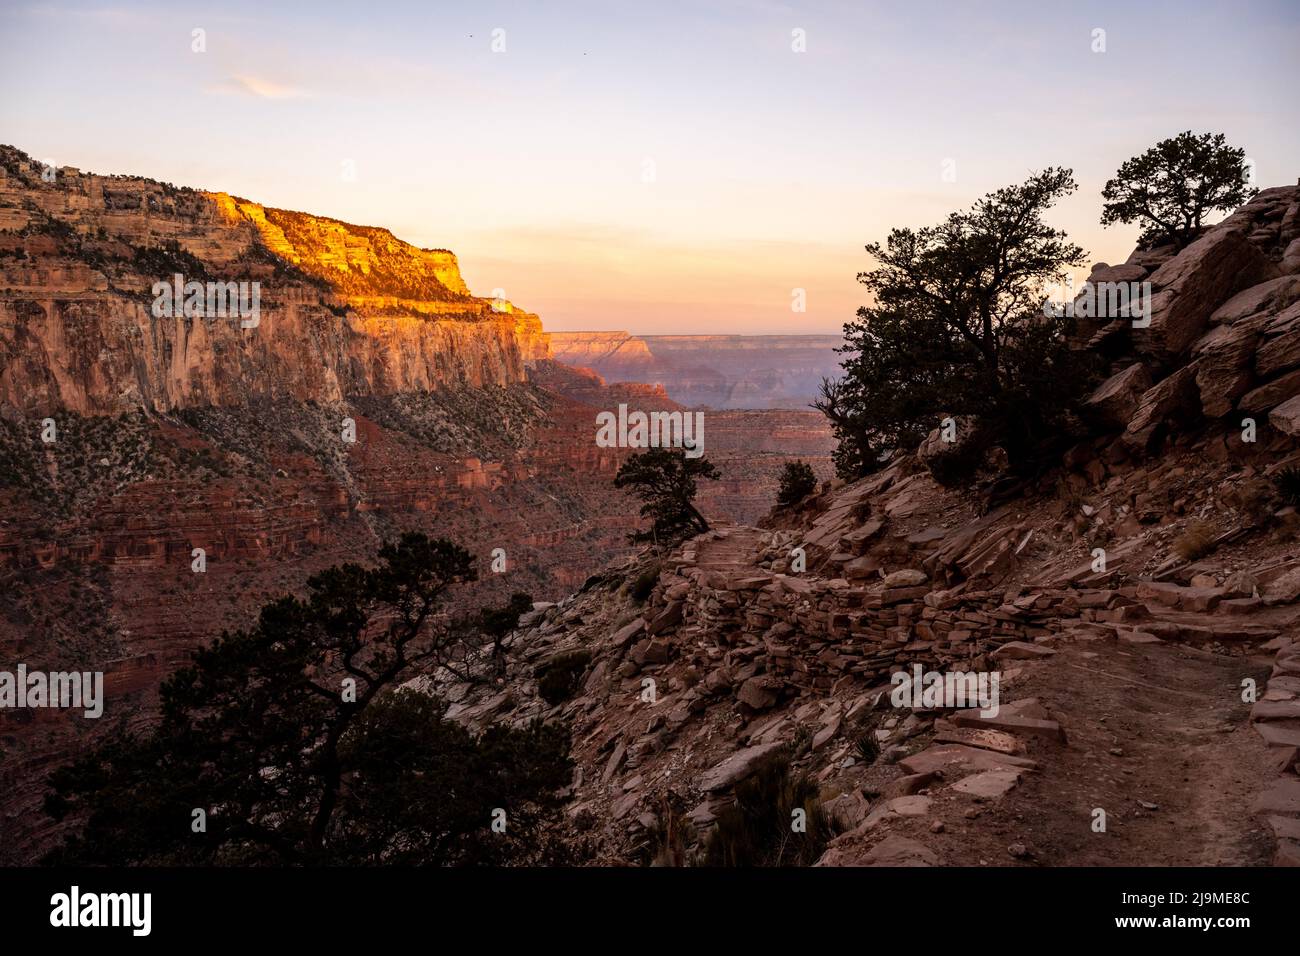 South Kaibab Trail Snakes Around The Canyon Wall At Sunrise on a clear morning Stock Photo